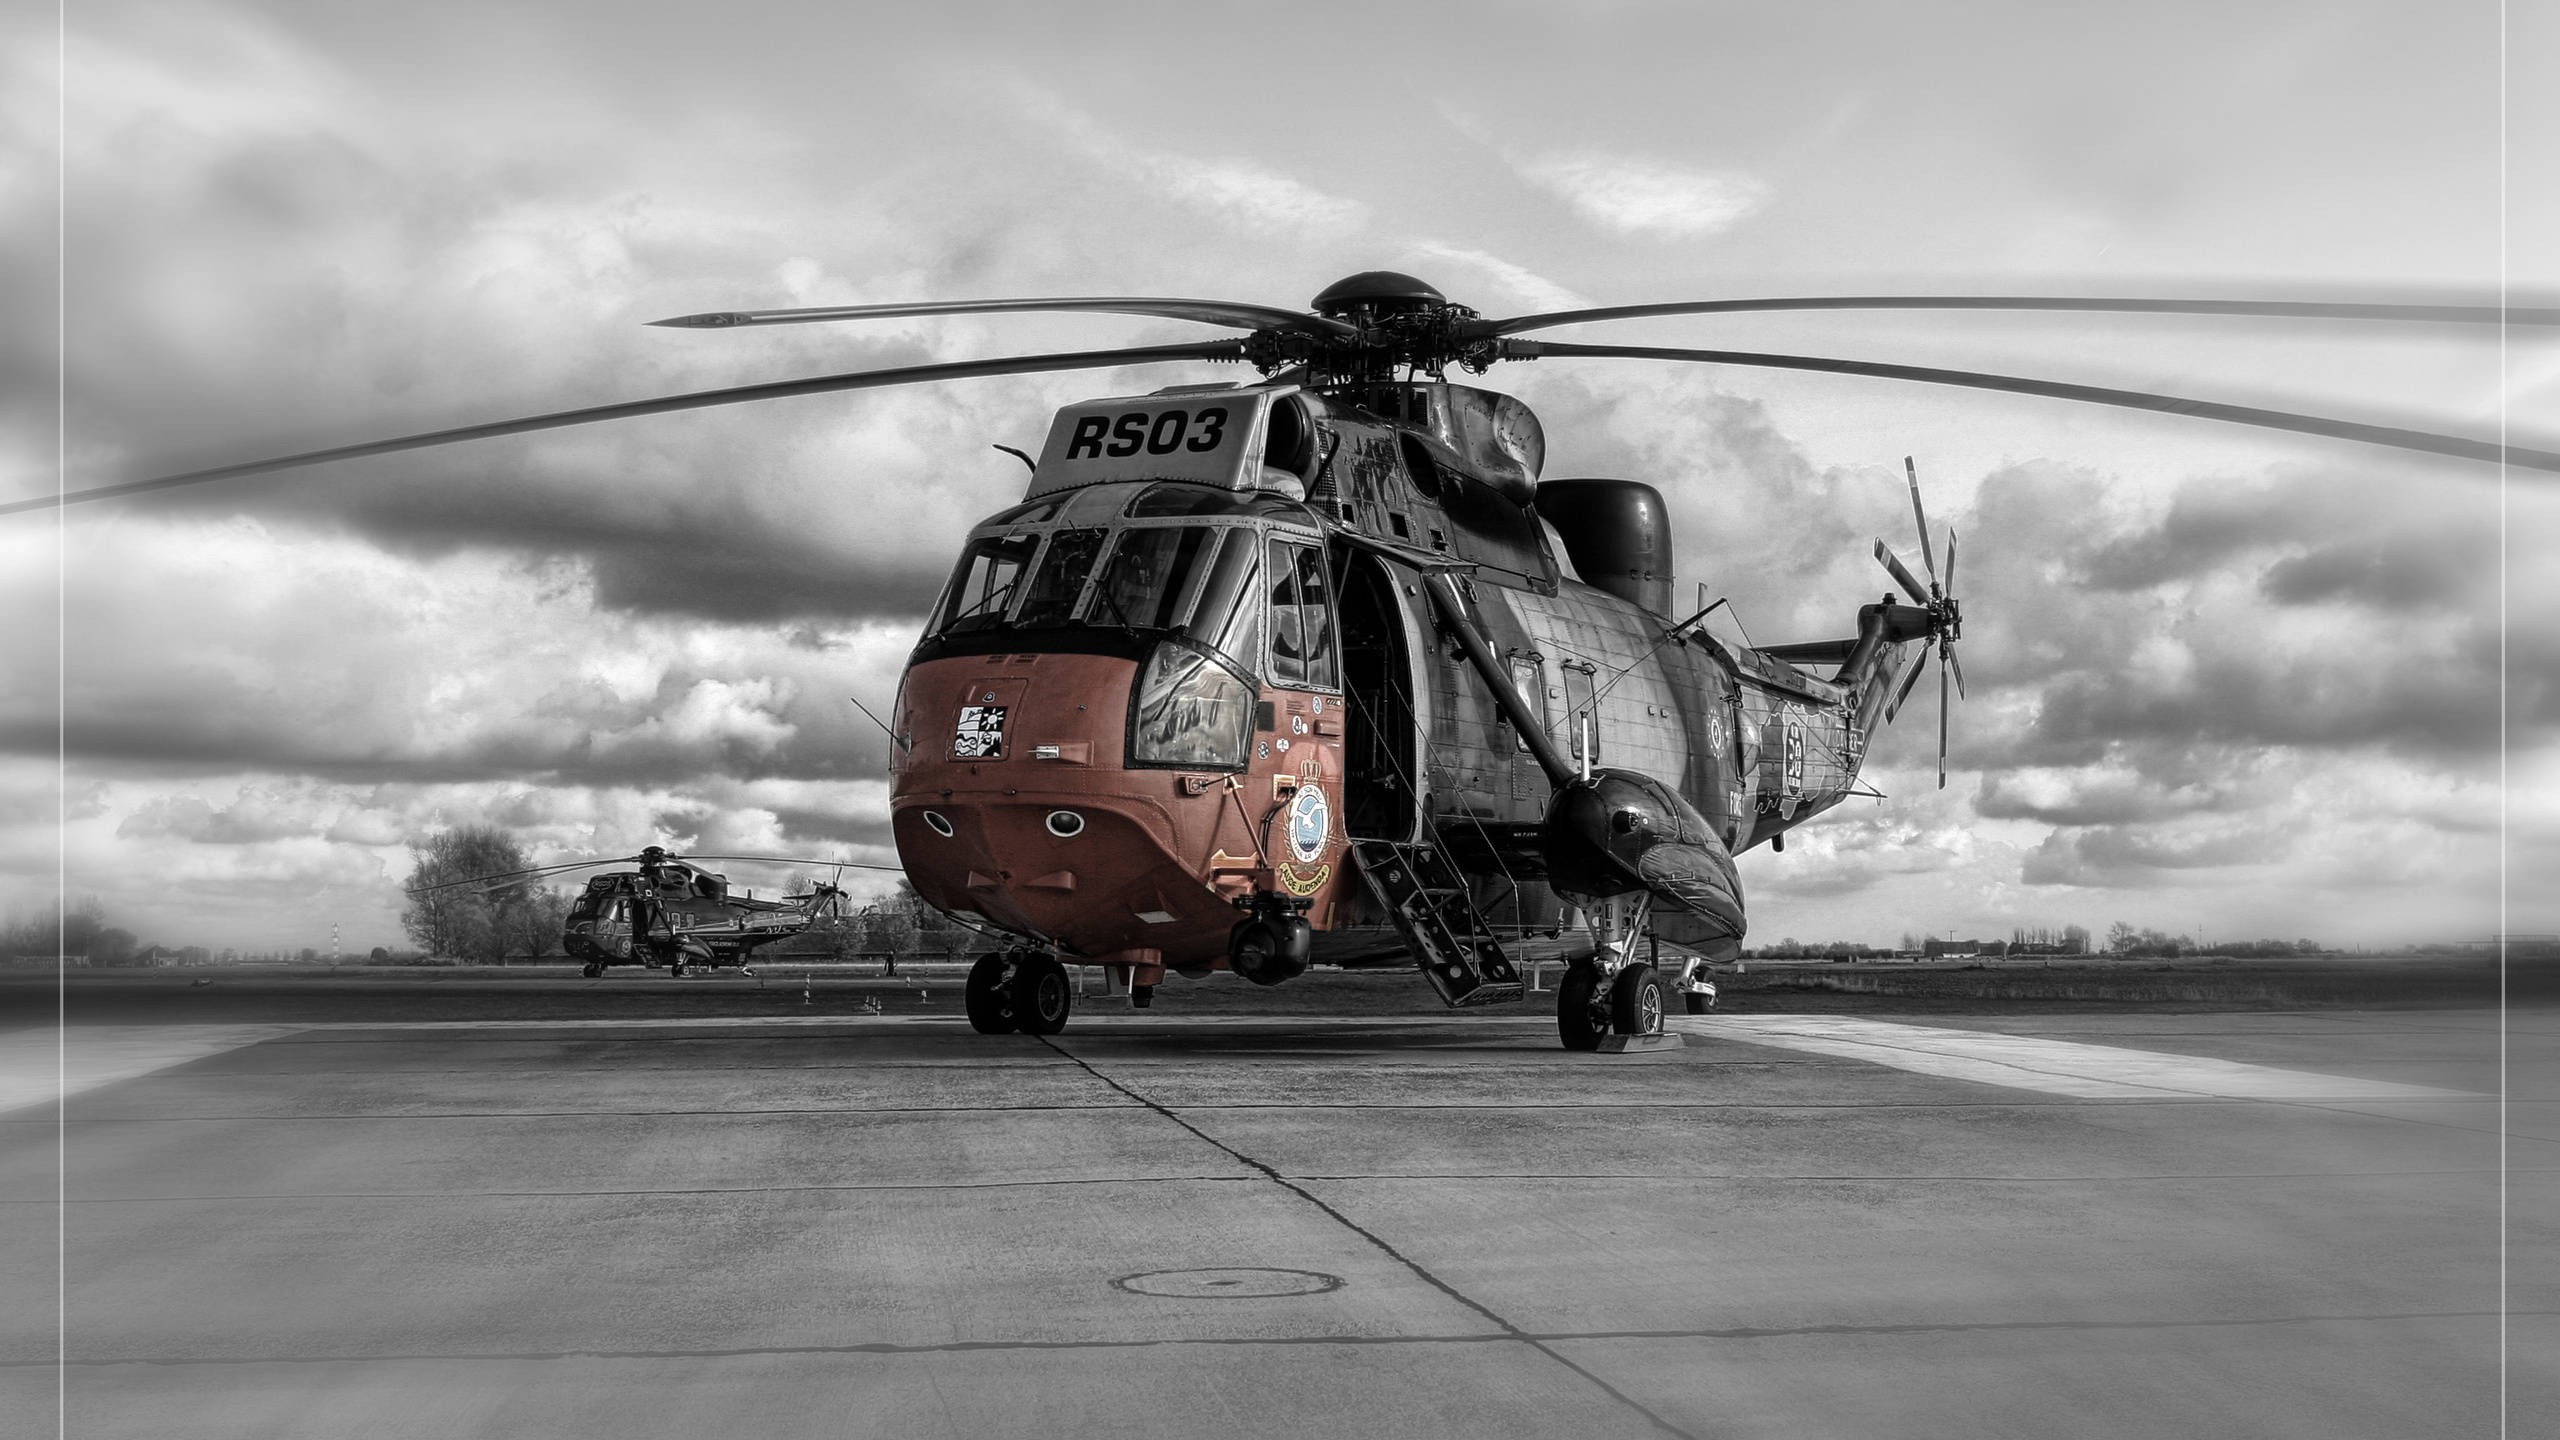 General 2560x1440 helicopters vehicle selective coloring aircraft American aircraft British aircraft